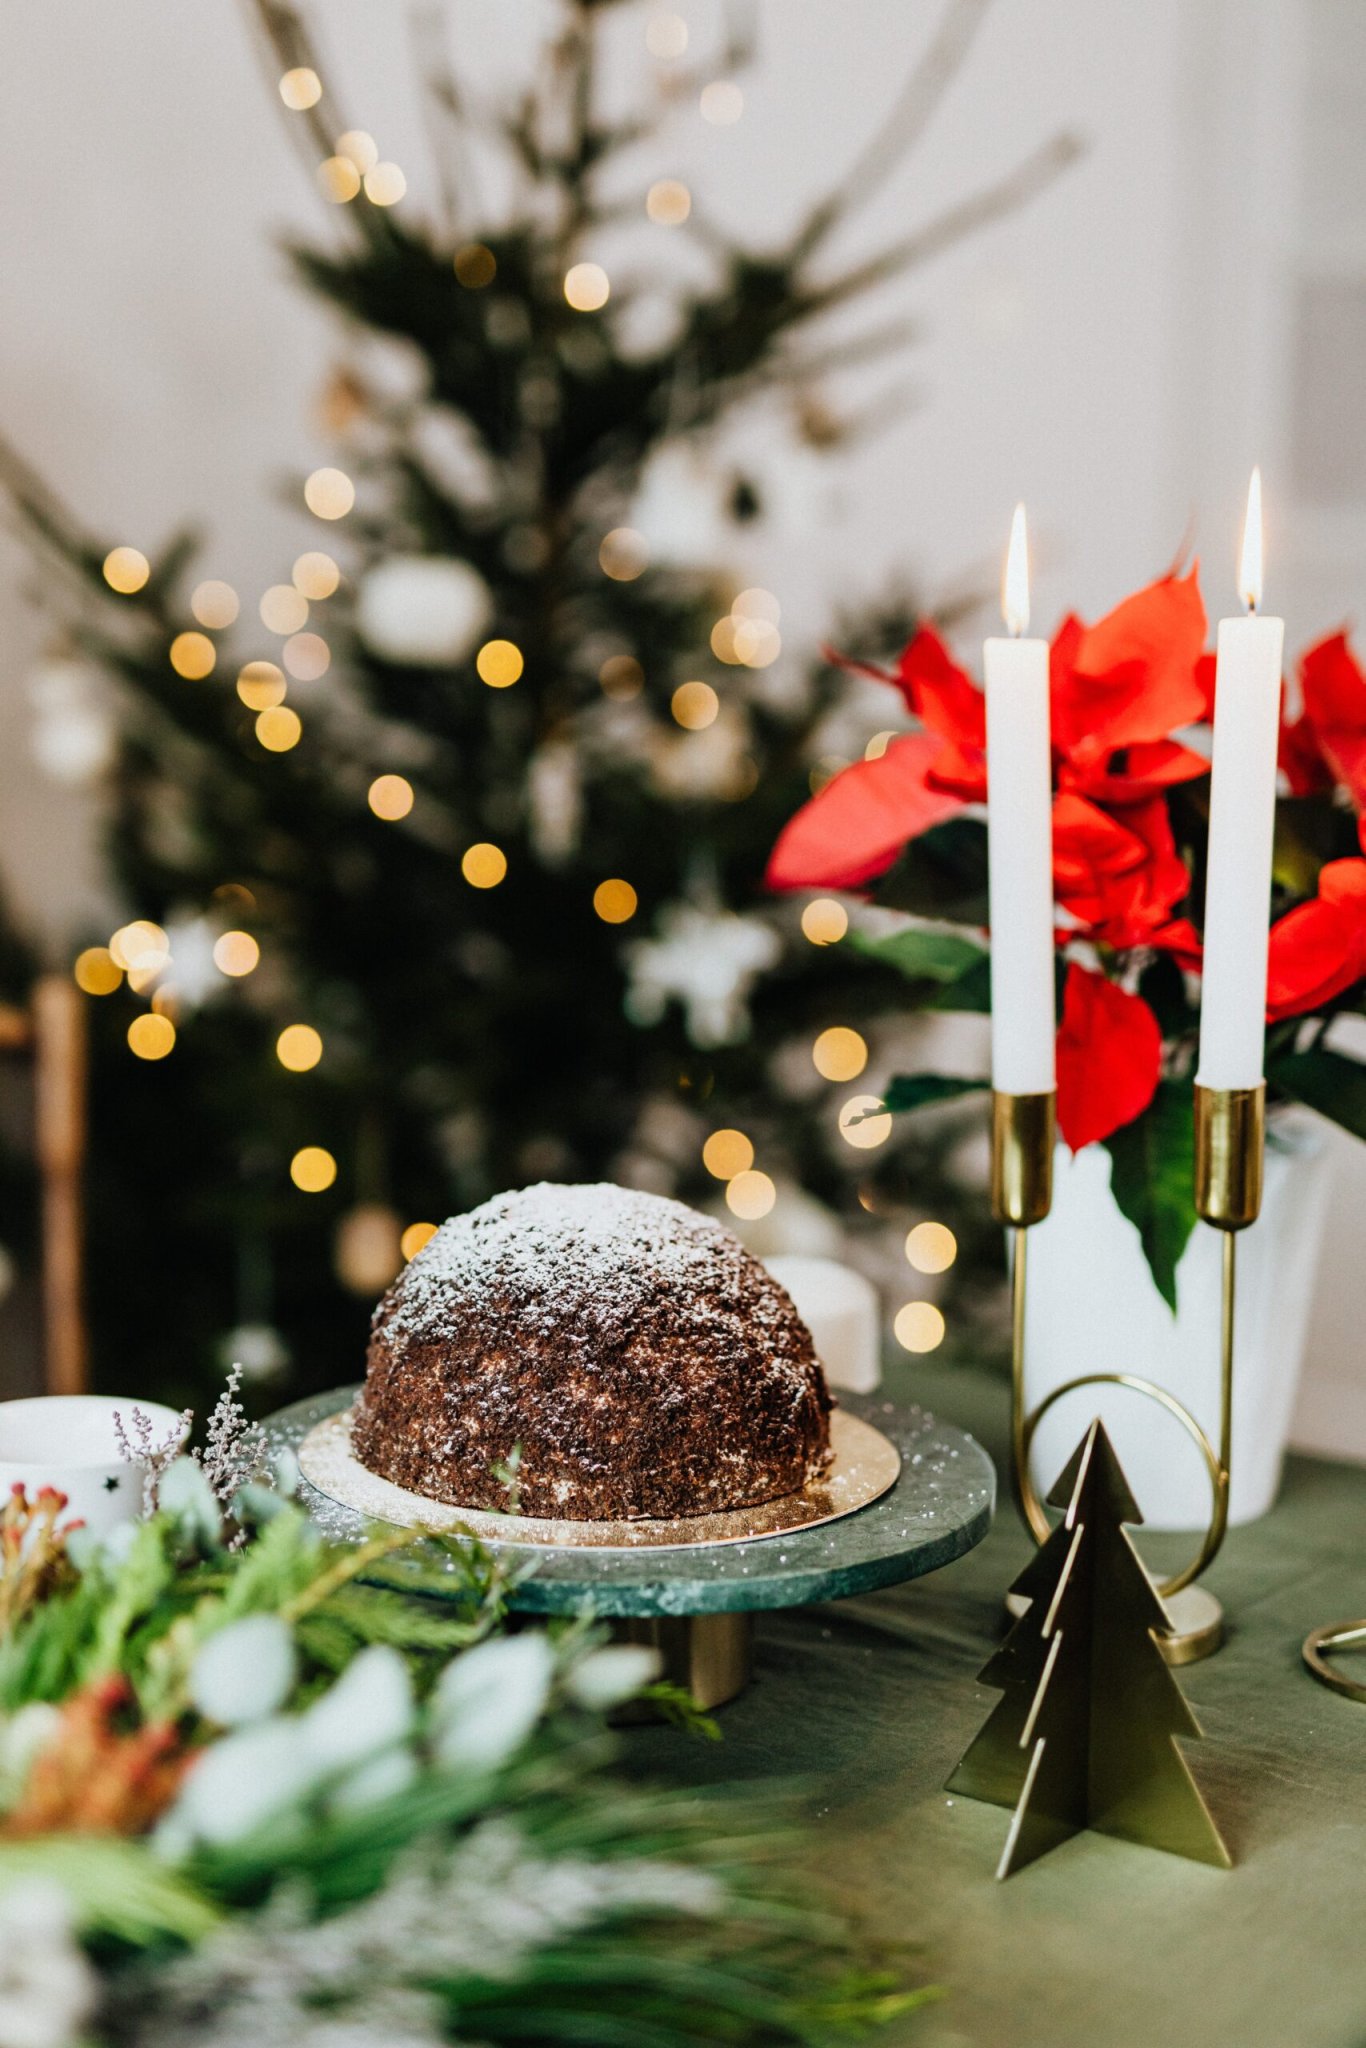 What Is the World Having for Dessert This Christmas?